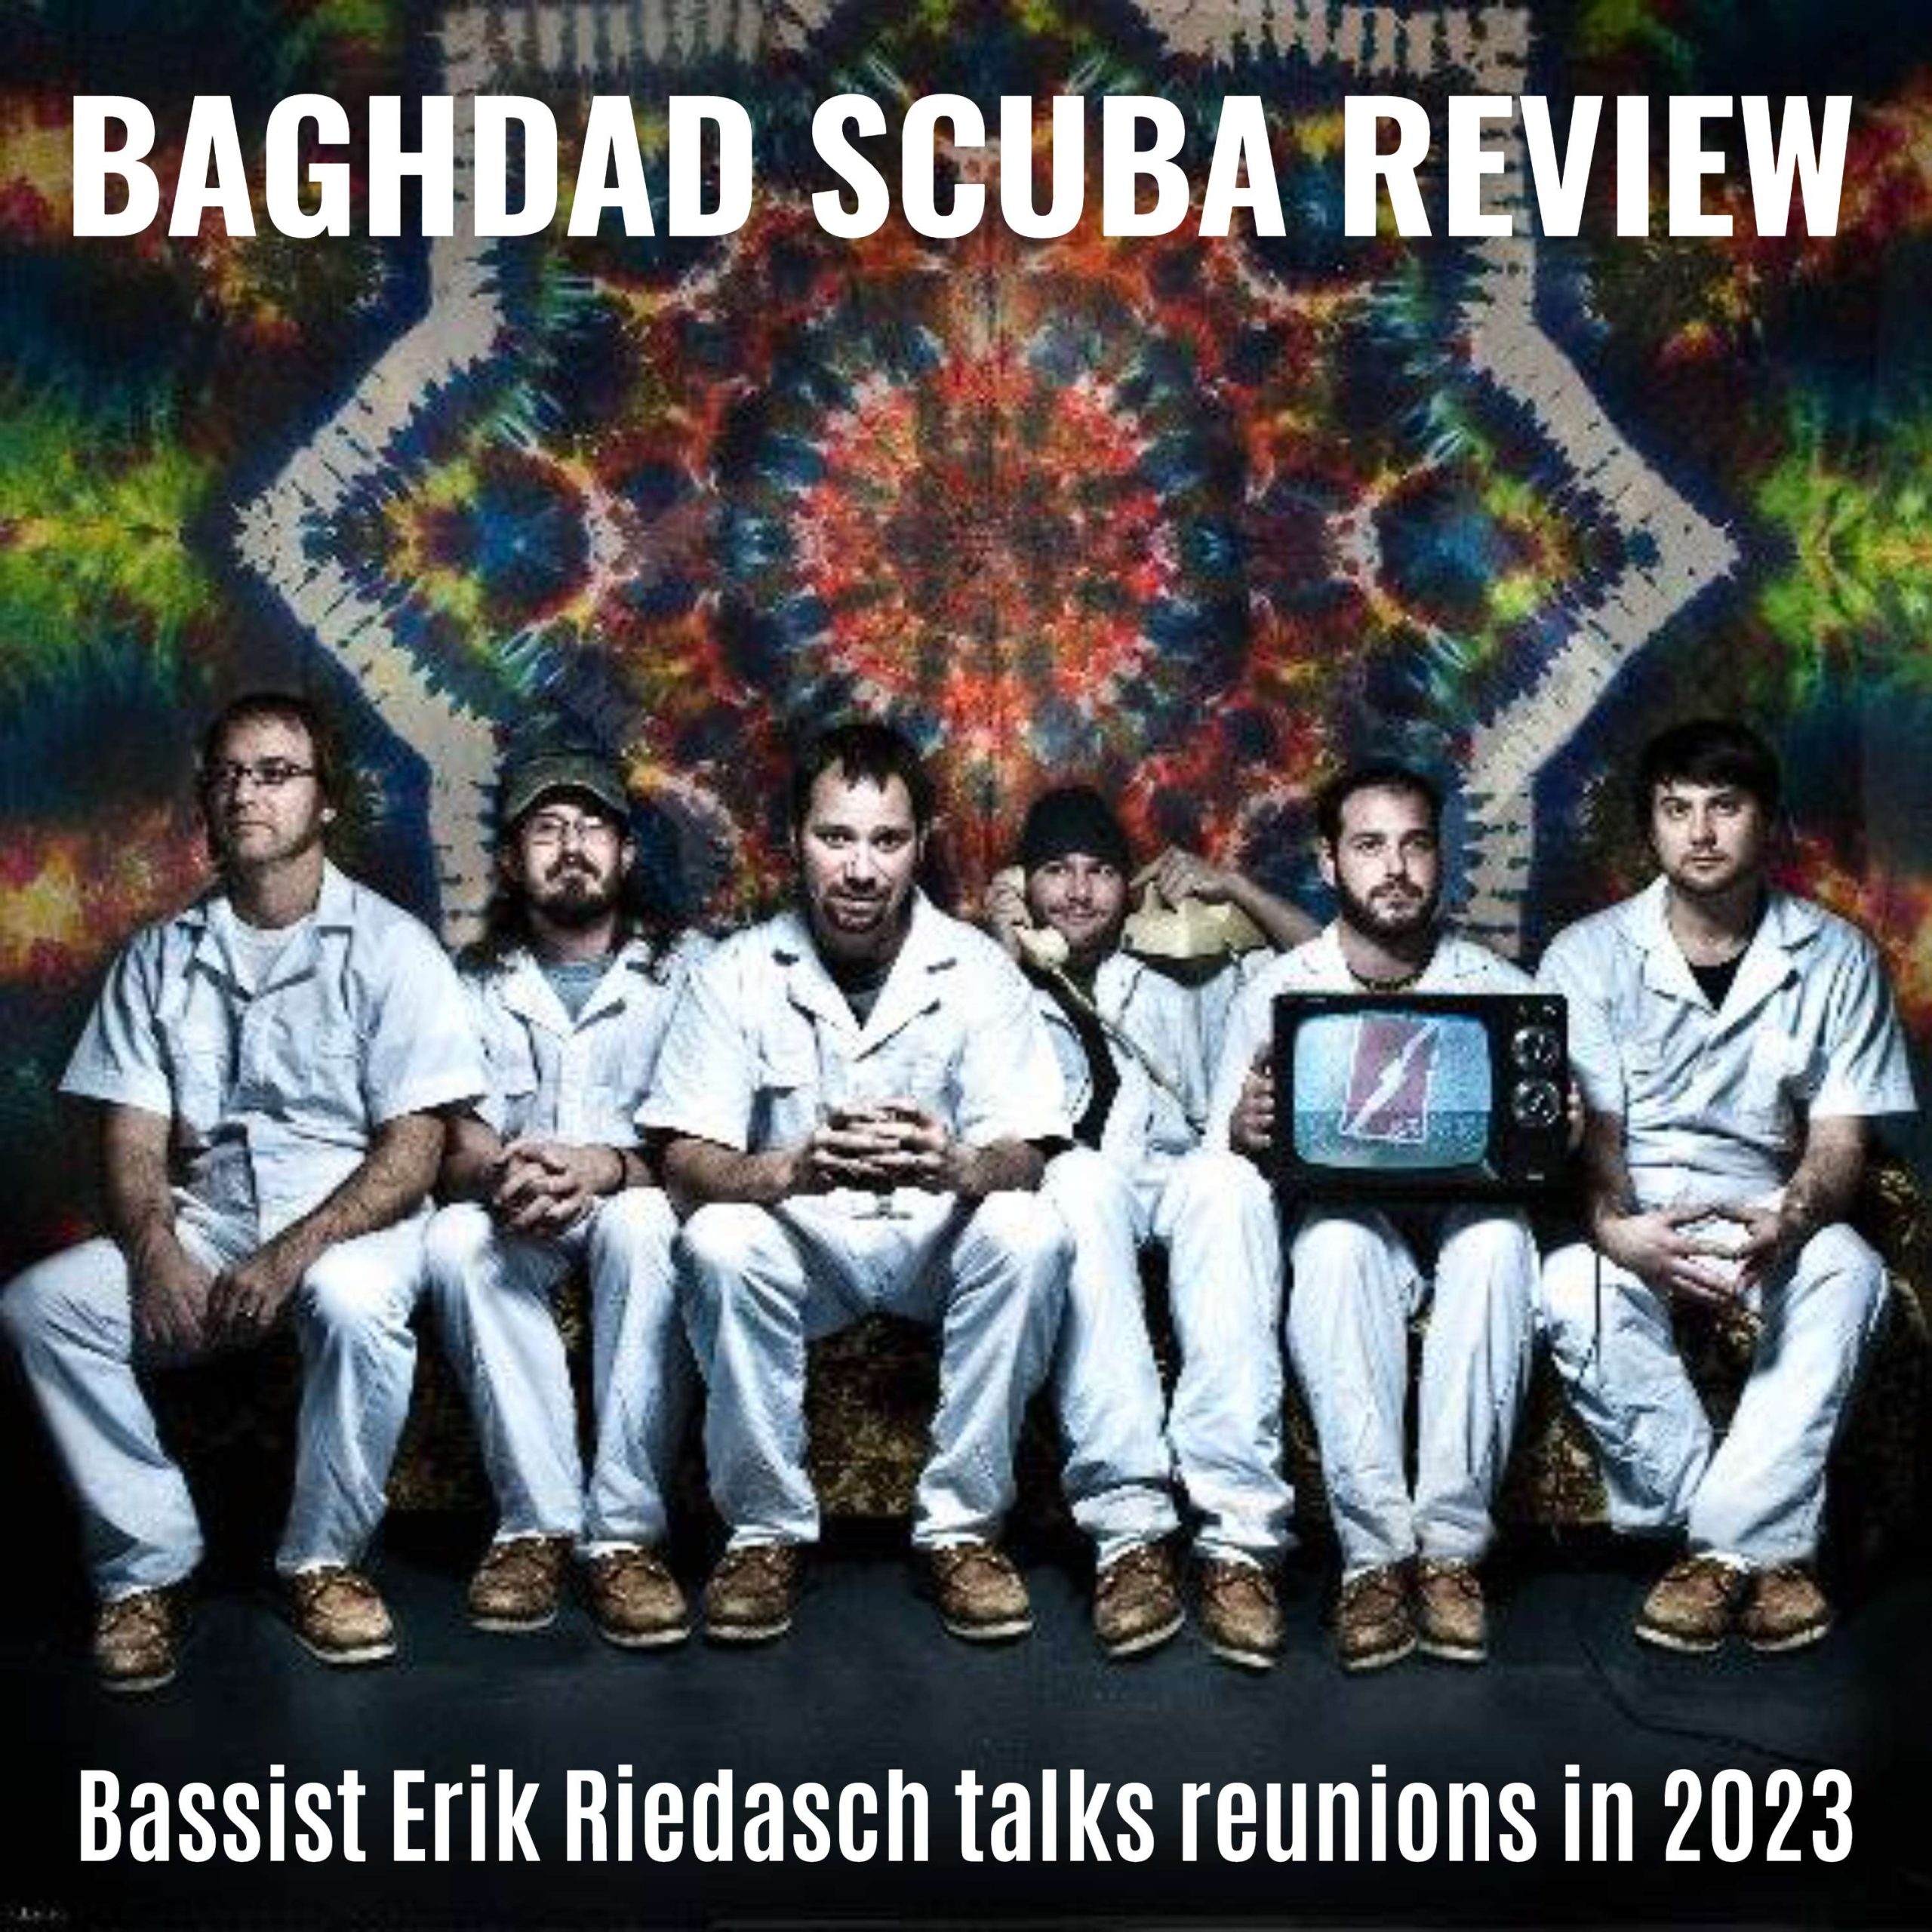 Baghdad Scuba Review, photo by Nick Berard